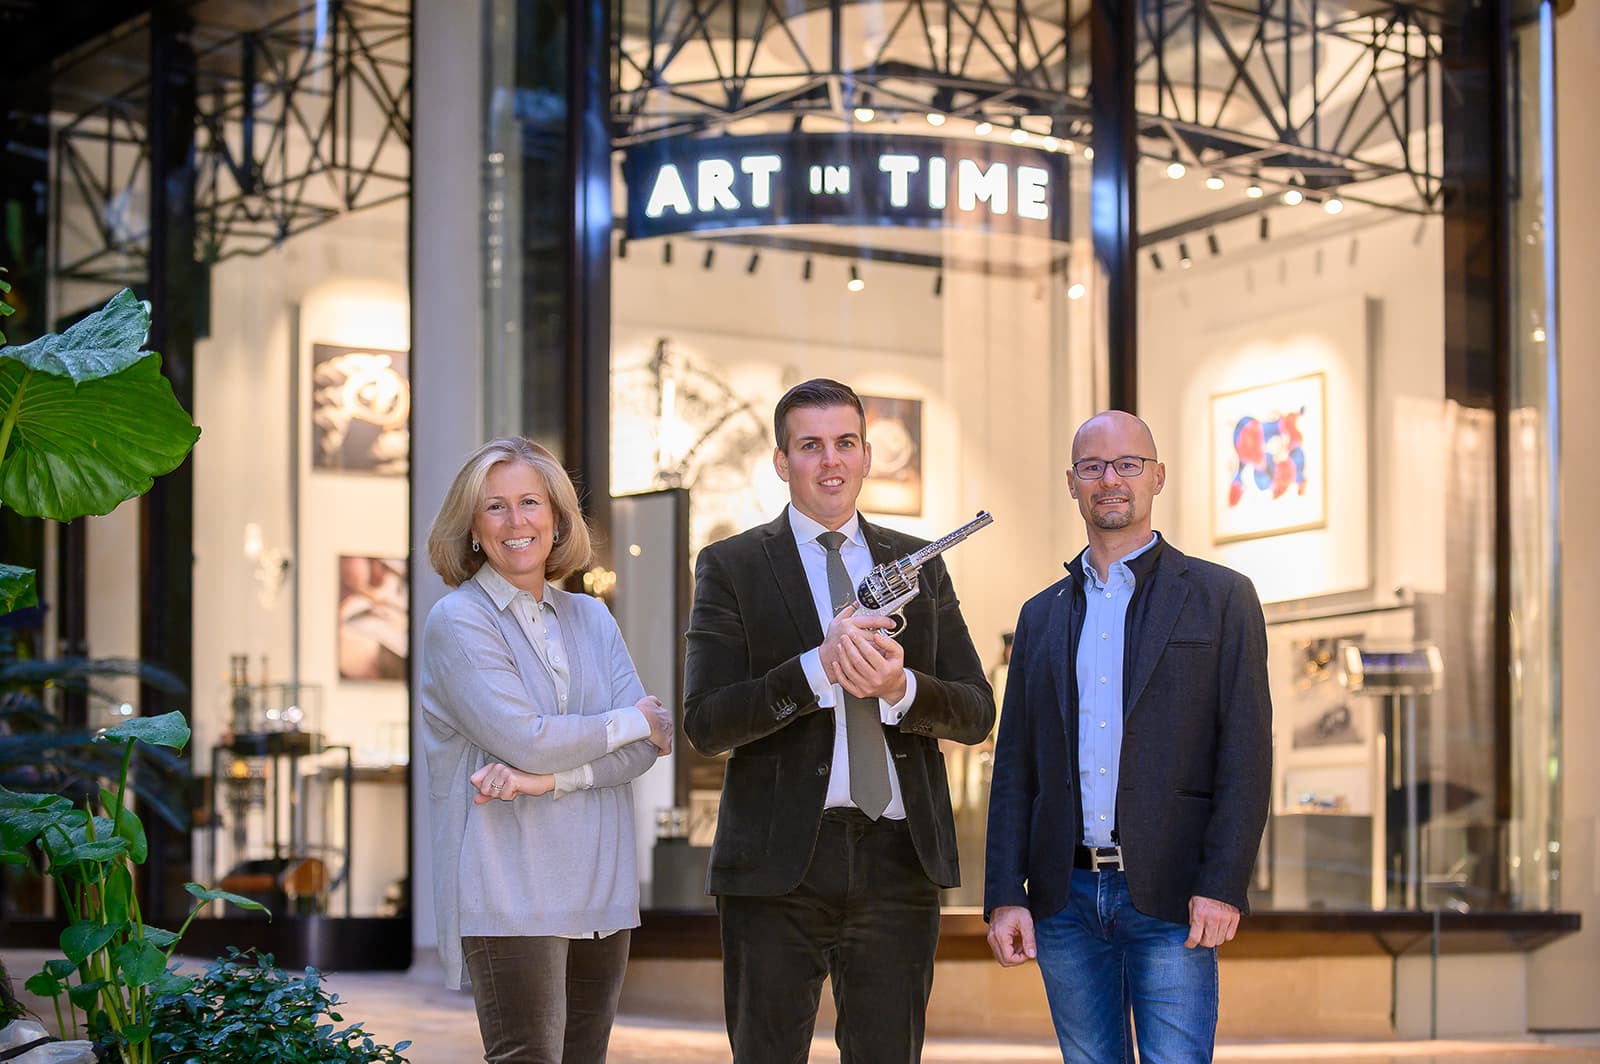  From left to right: Marine Lemonnier of 289 Conlsulting, Yohann Martinez, Director of Art in Time Monaco, and Arnaud Nicolas, CEO of L’Épée